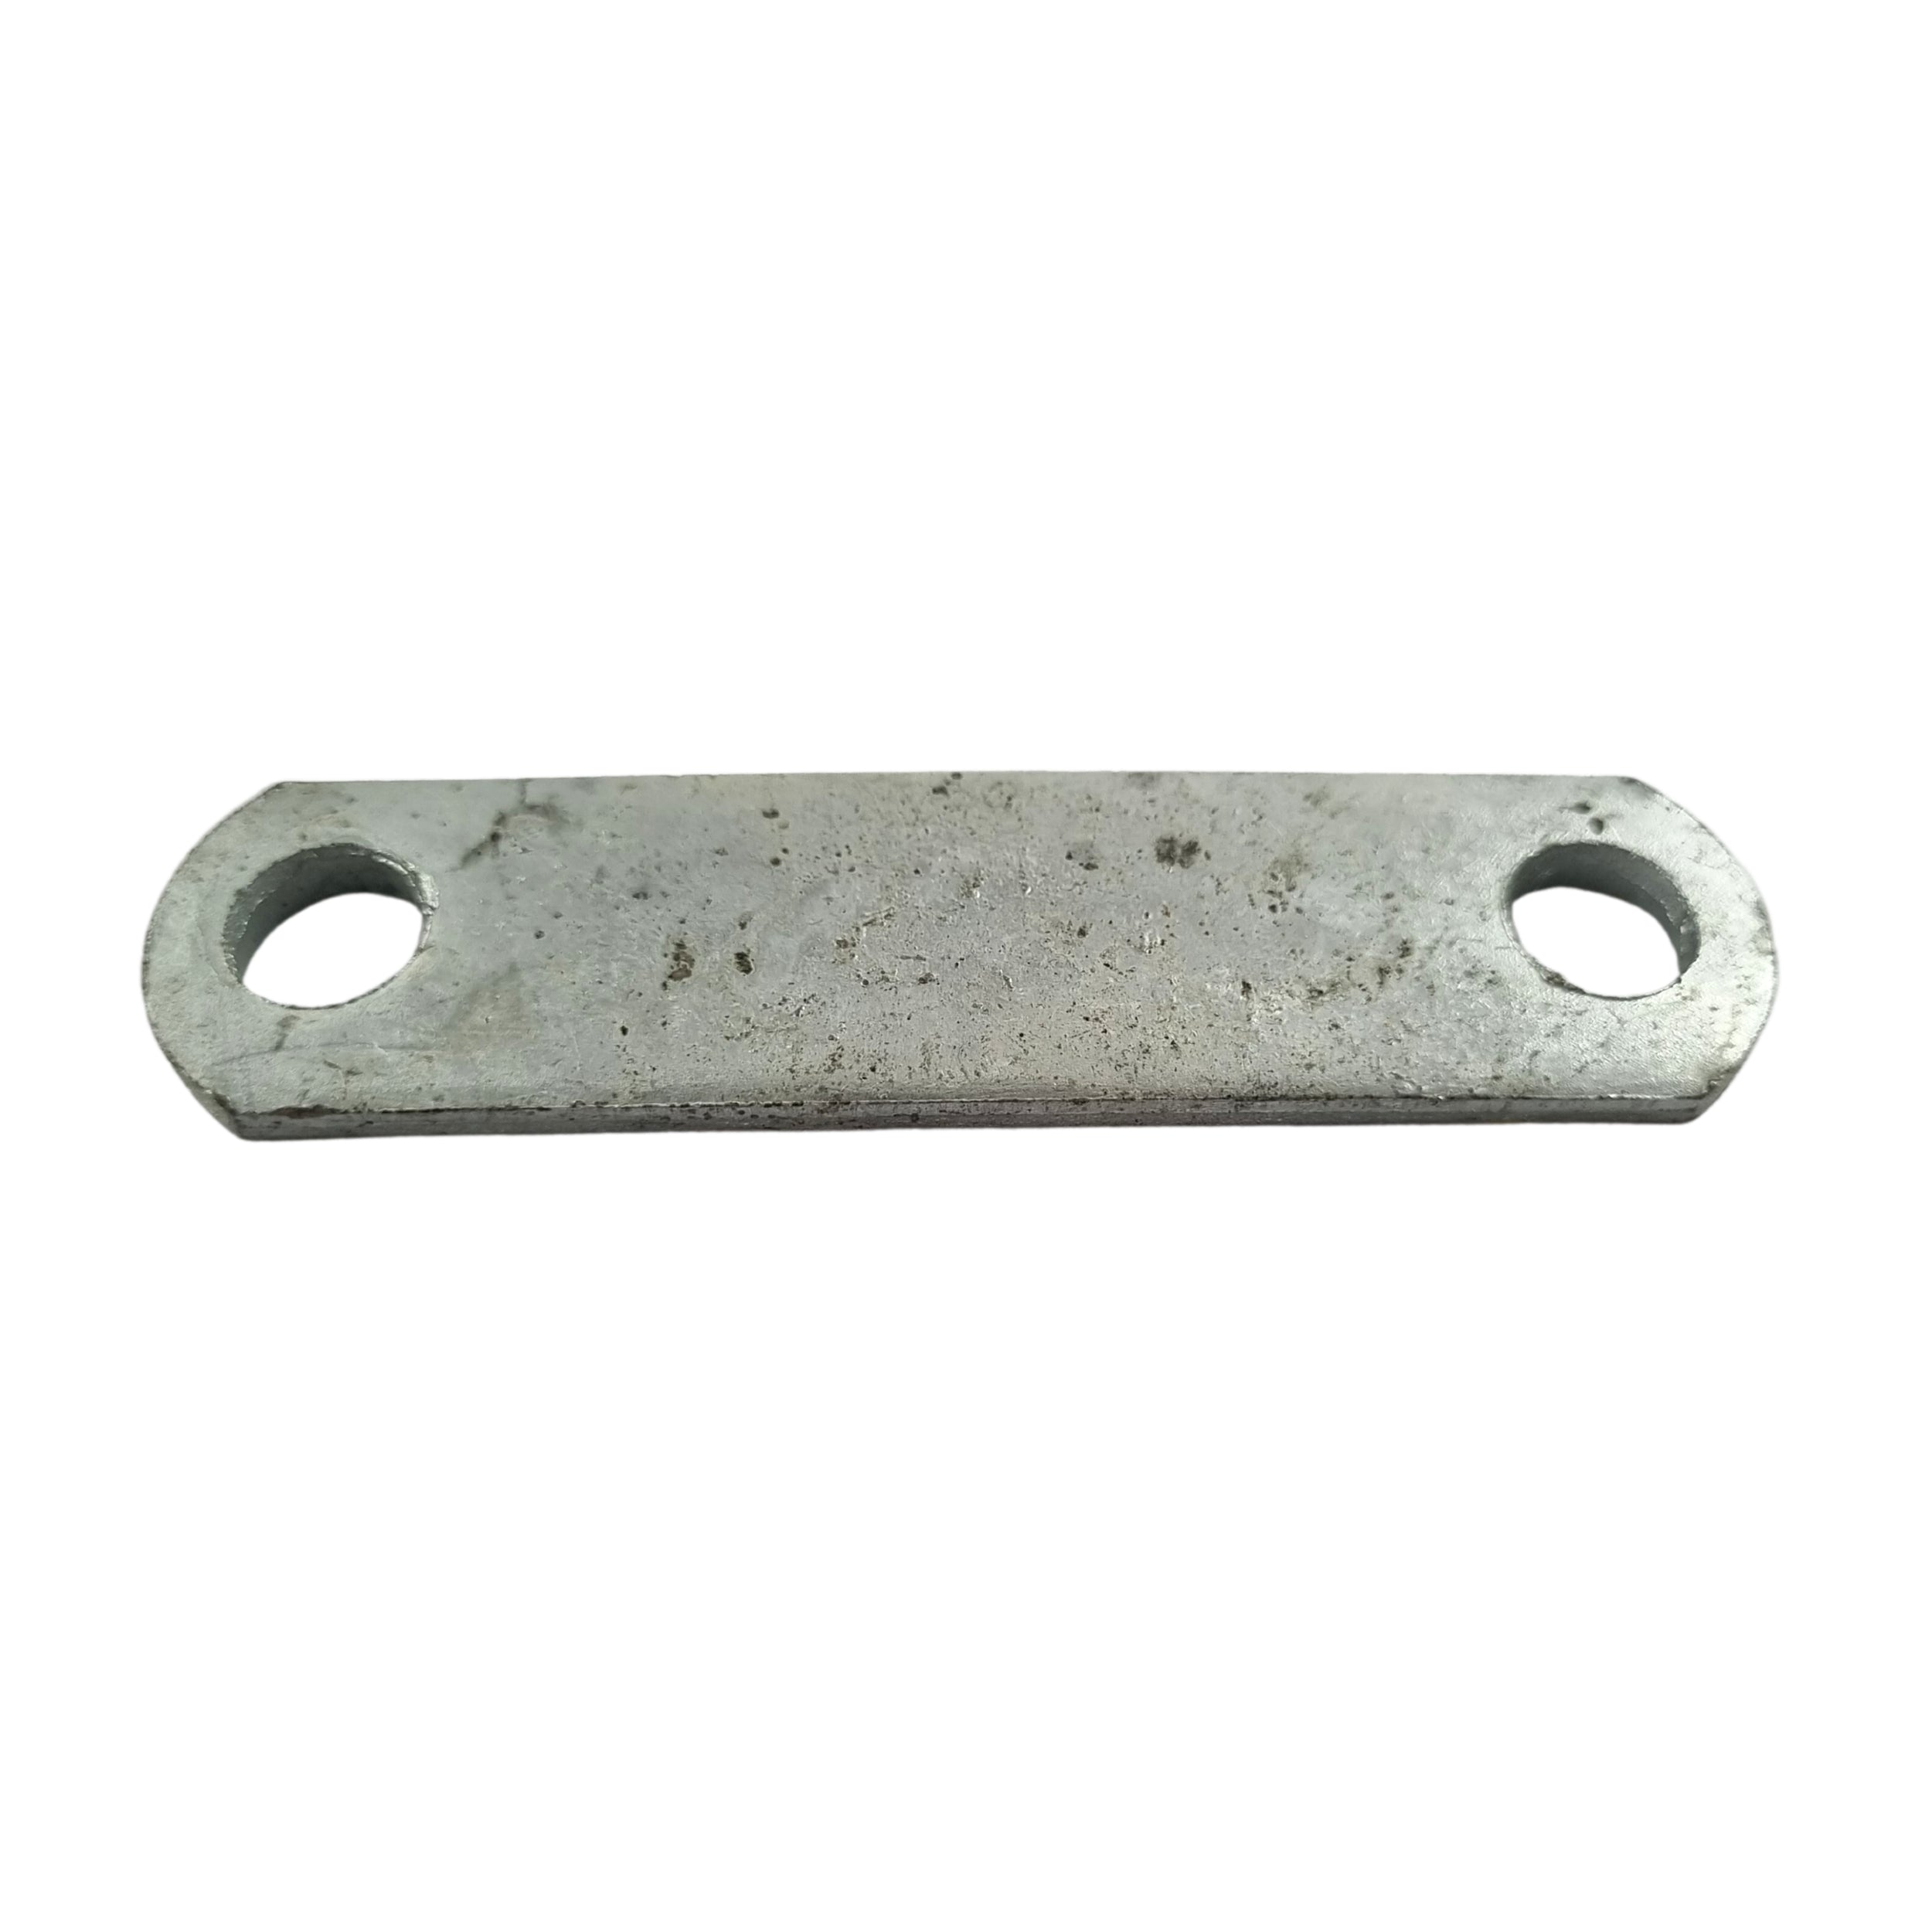 Backing Plate - Galvanised. Australian made. Various sizes. Shop fence and gate fittings online. Australia wide shipping. Chain.com.au